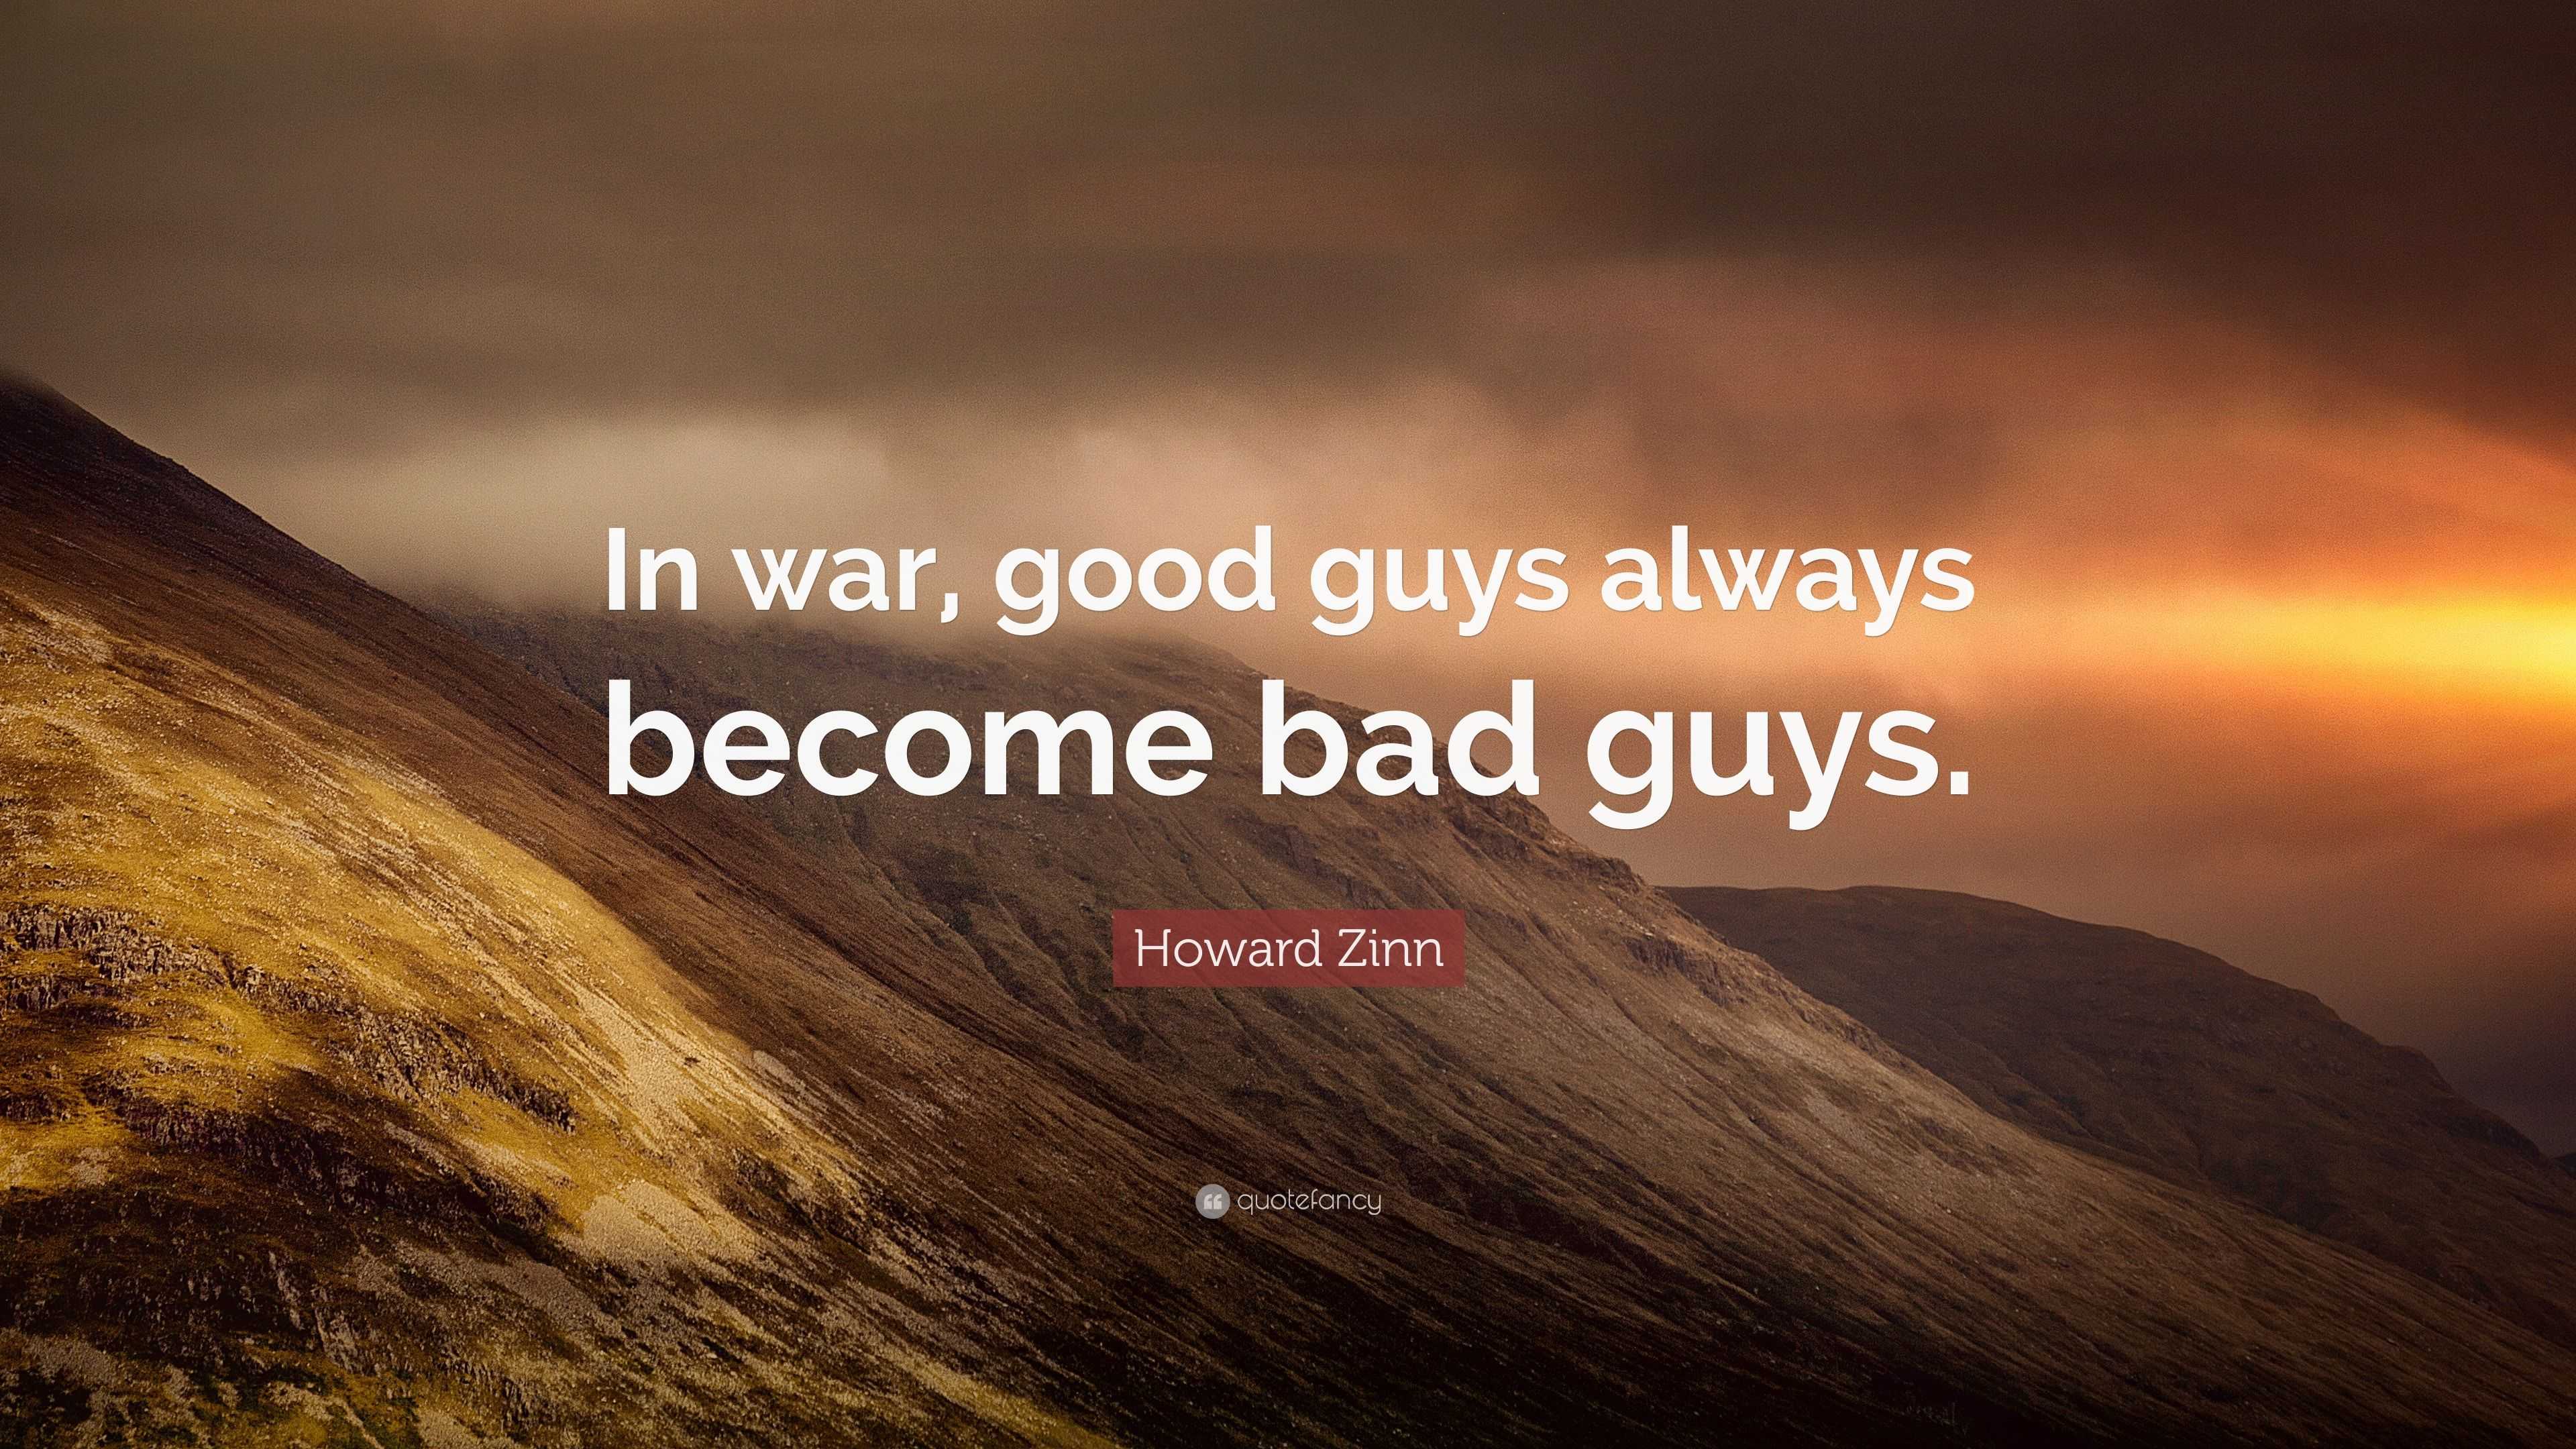 mean quotes about guys